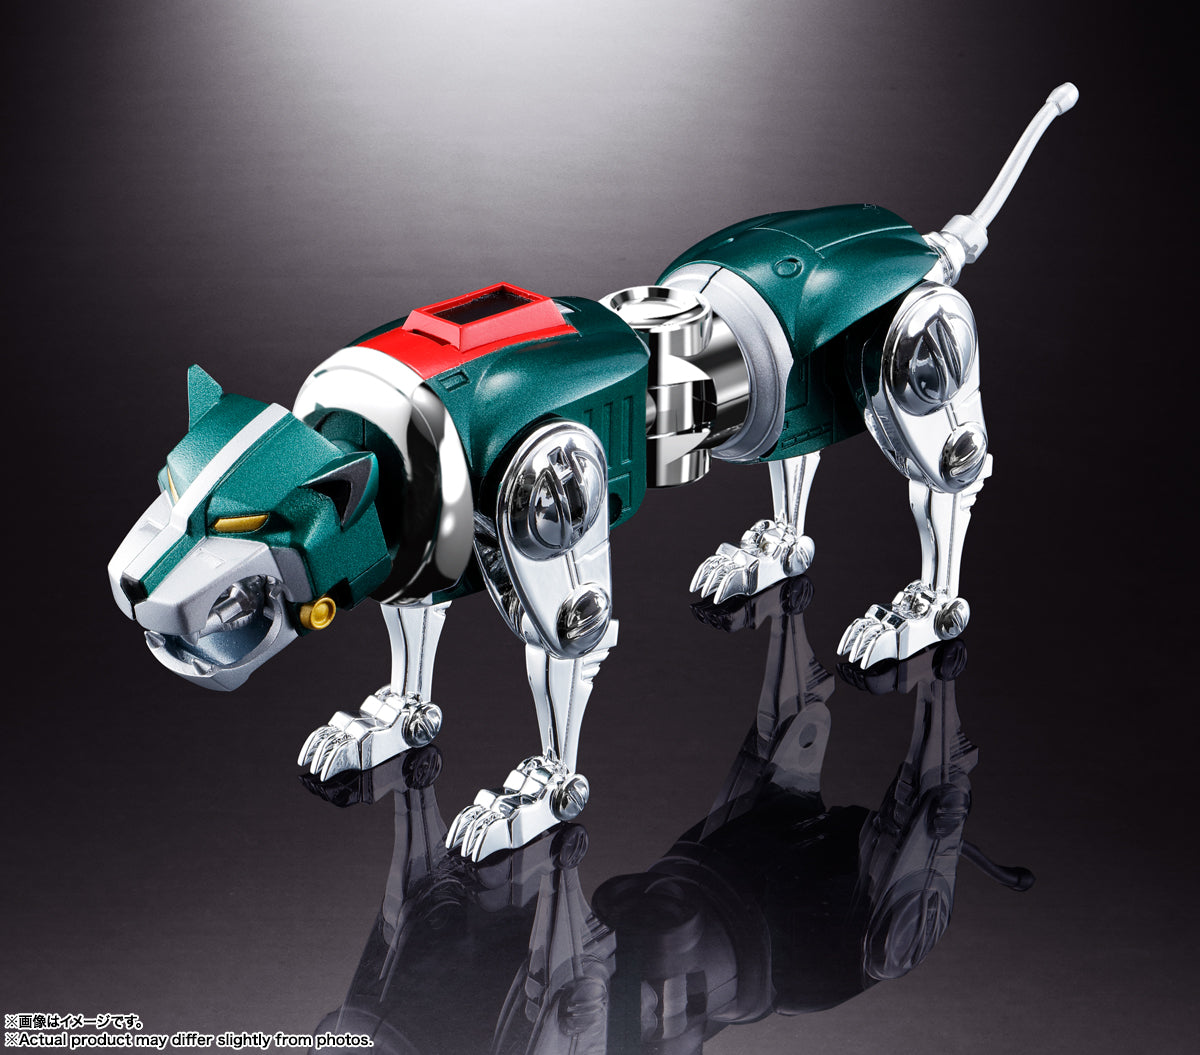 Voltron: Defender of the Universe Soul of Chogokin GX-71SP Voltron (Chogokin 50th/Voltron 40th Anniversary) Pre Order